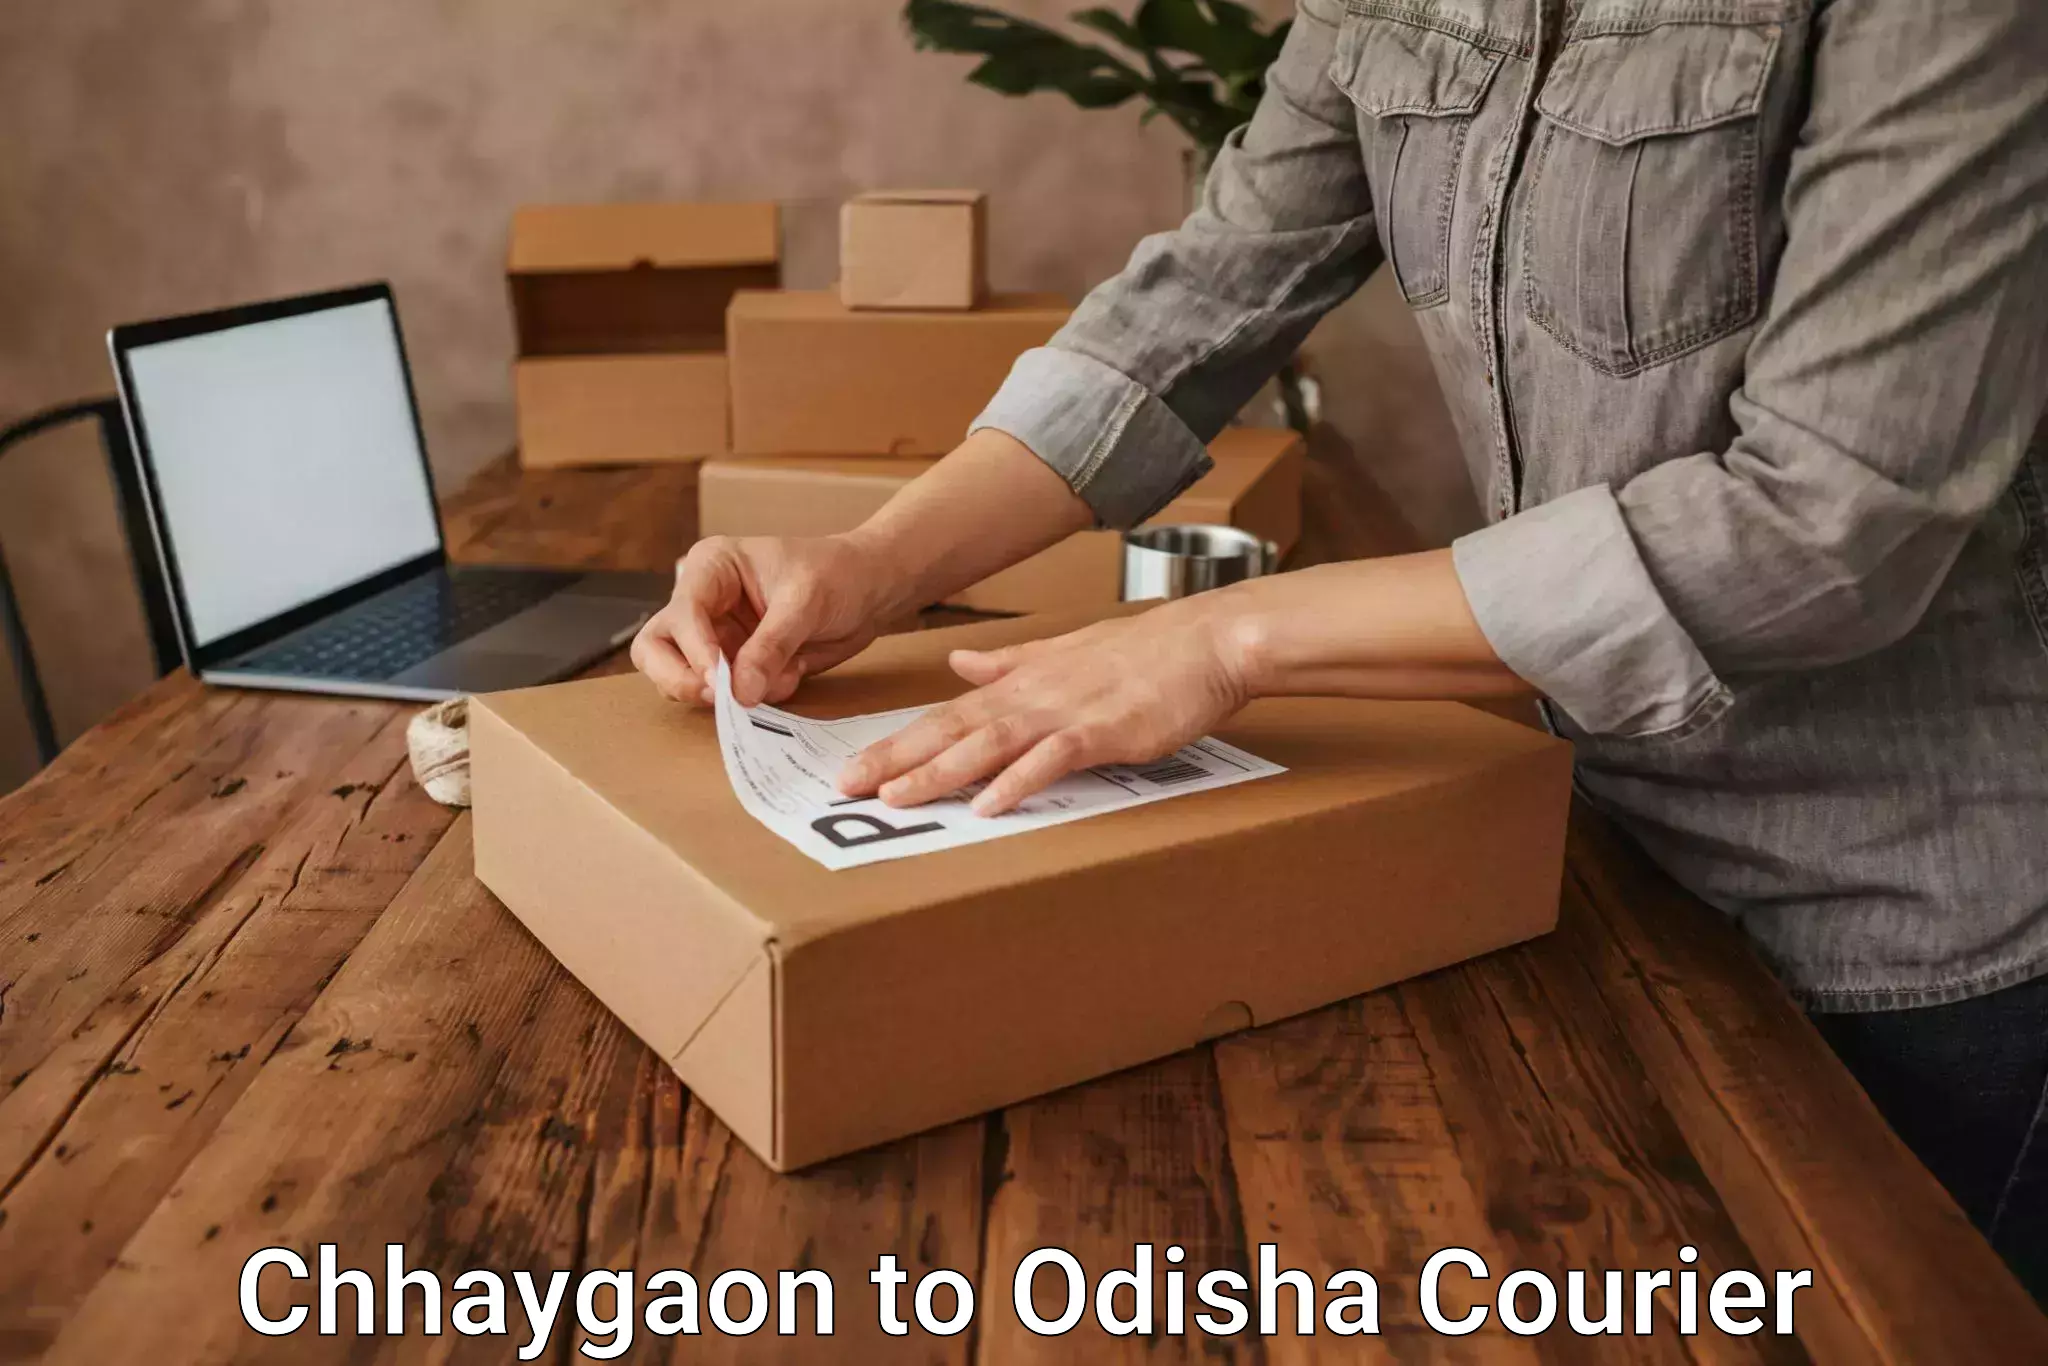 Professional courier handling Chhaygaon to Ghuntagadia